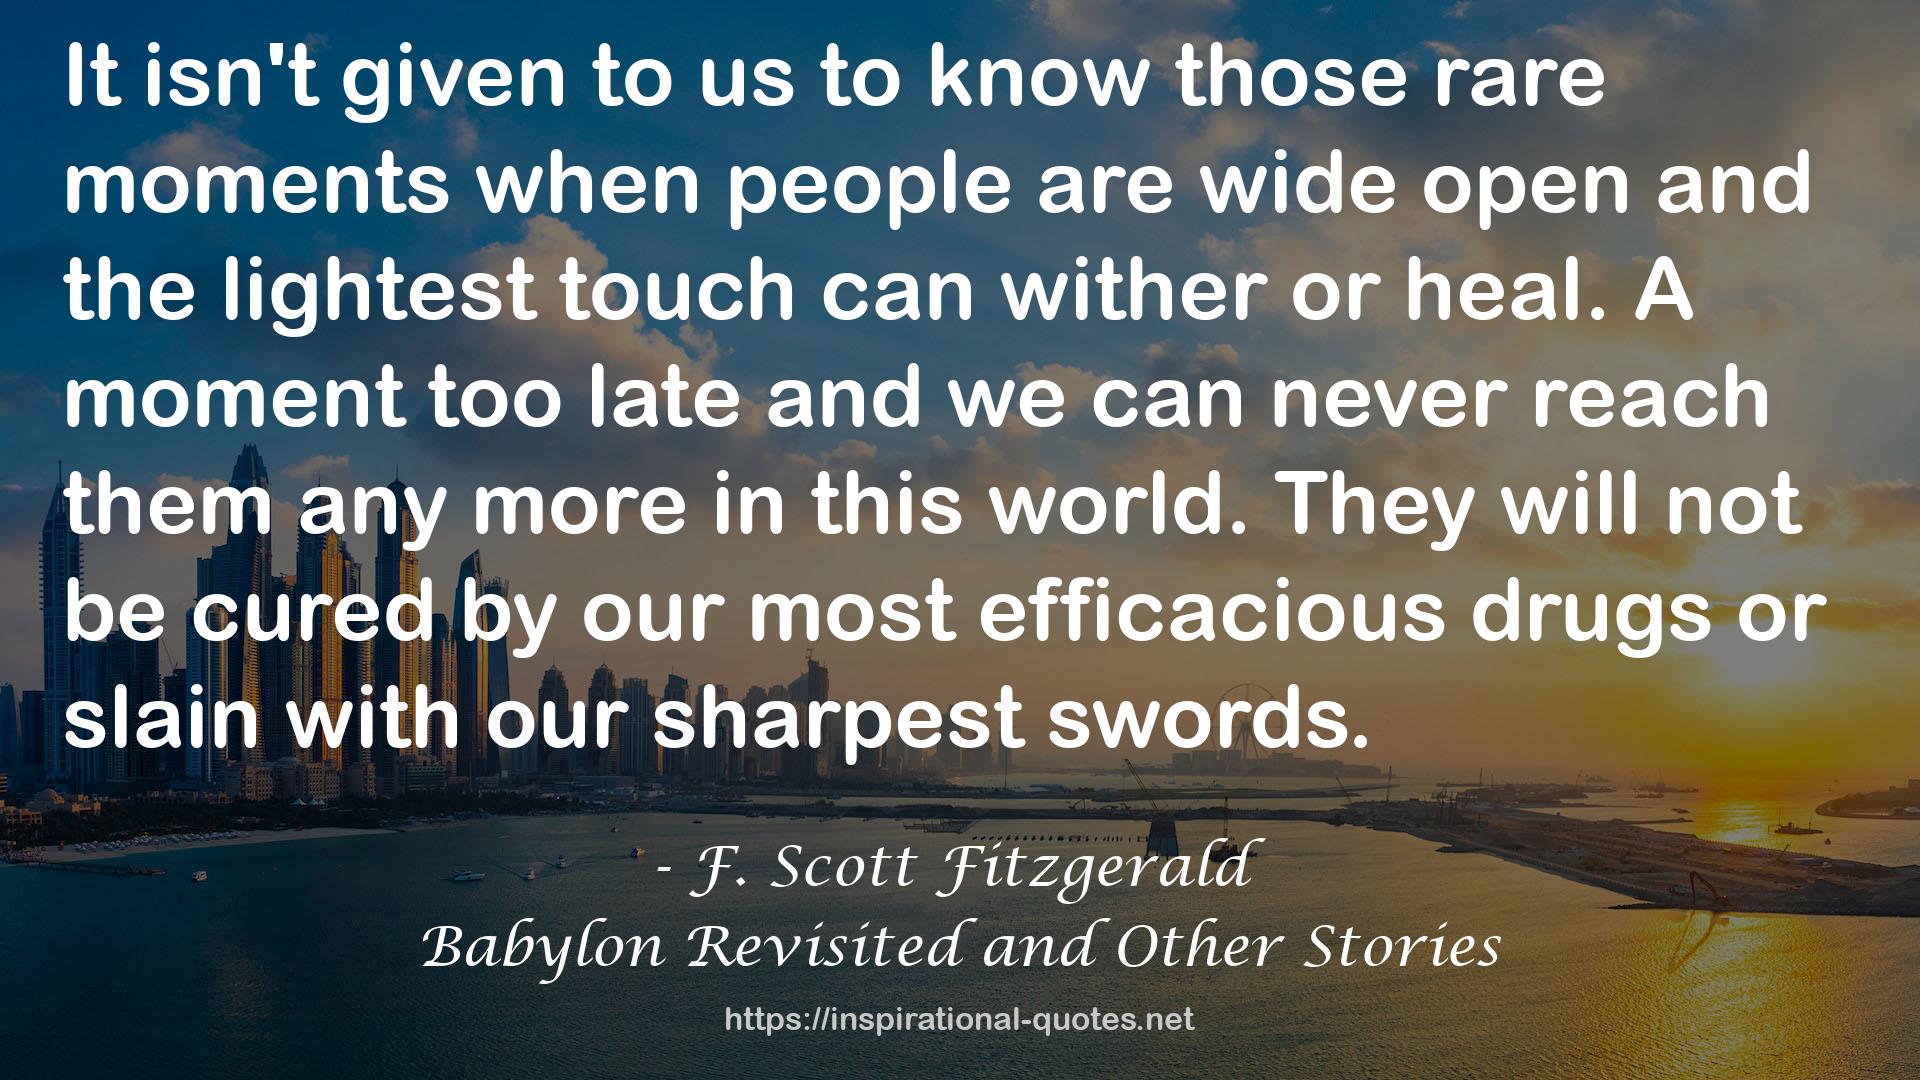 Babylon Revisited and Other Stories QUOTES